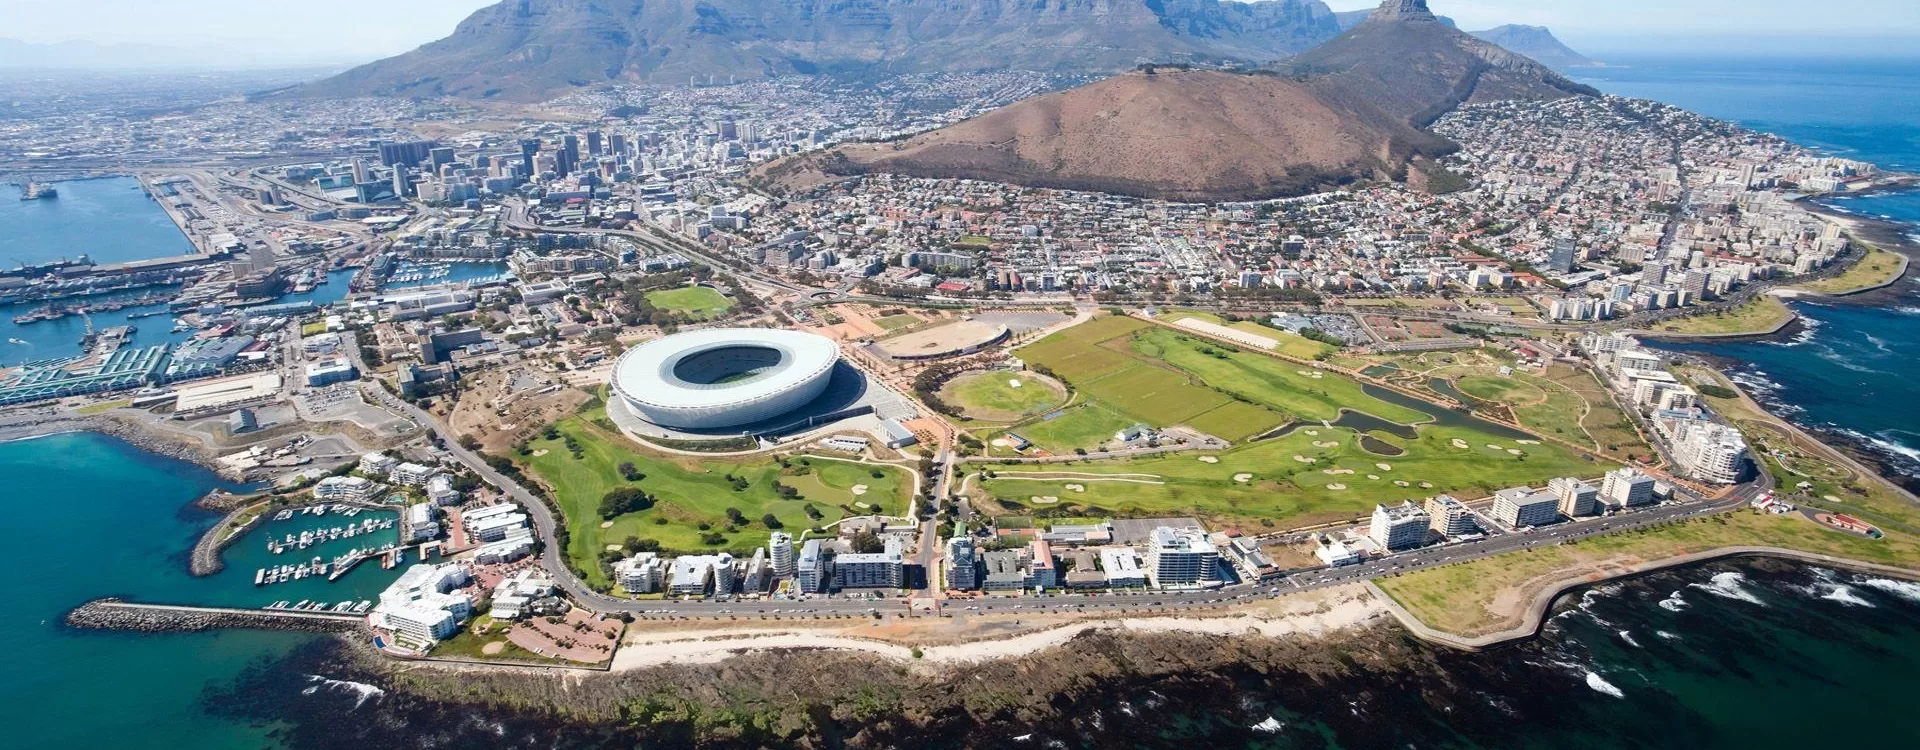 Guided Tours In Cape Town